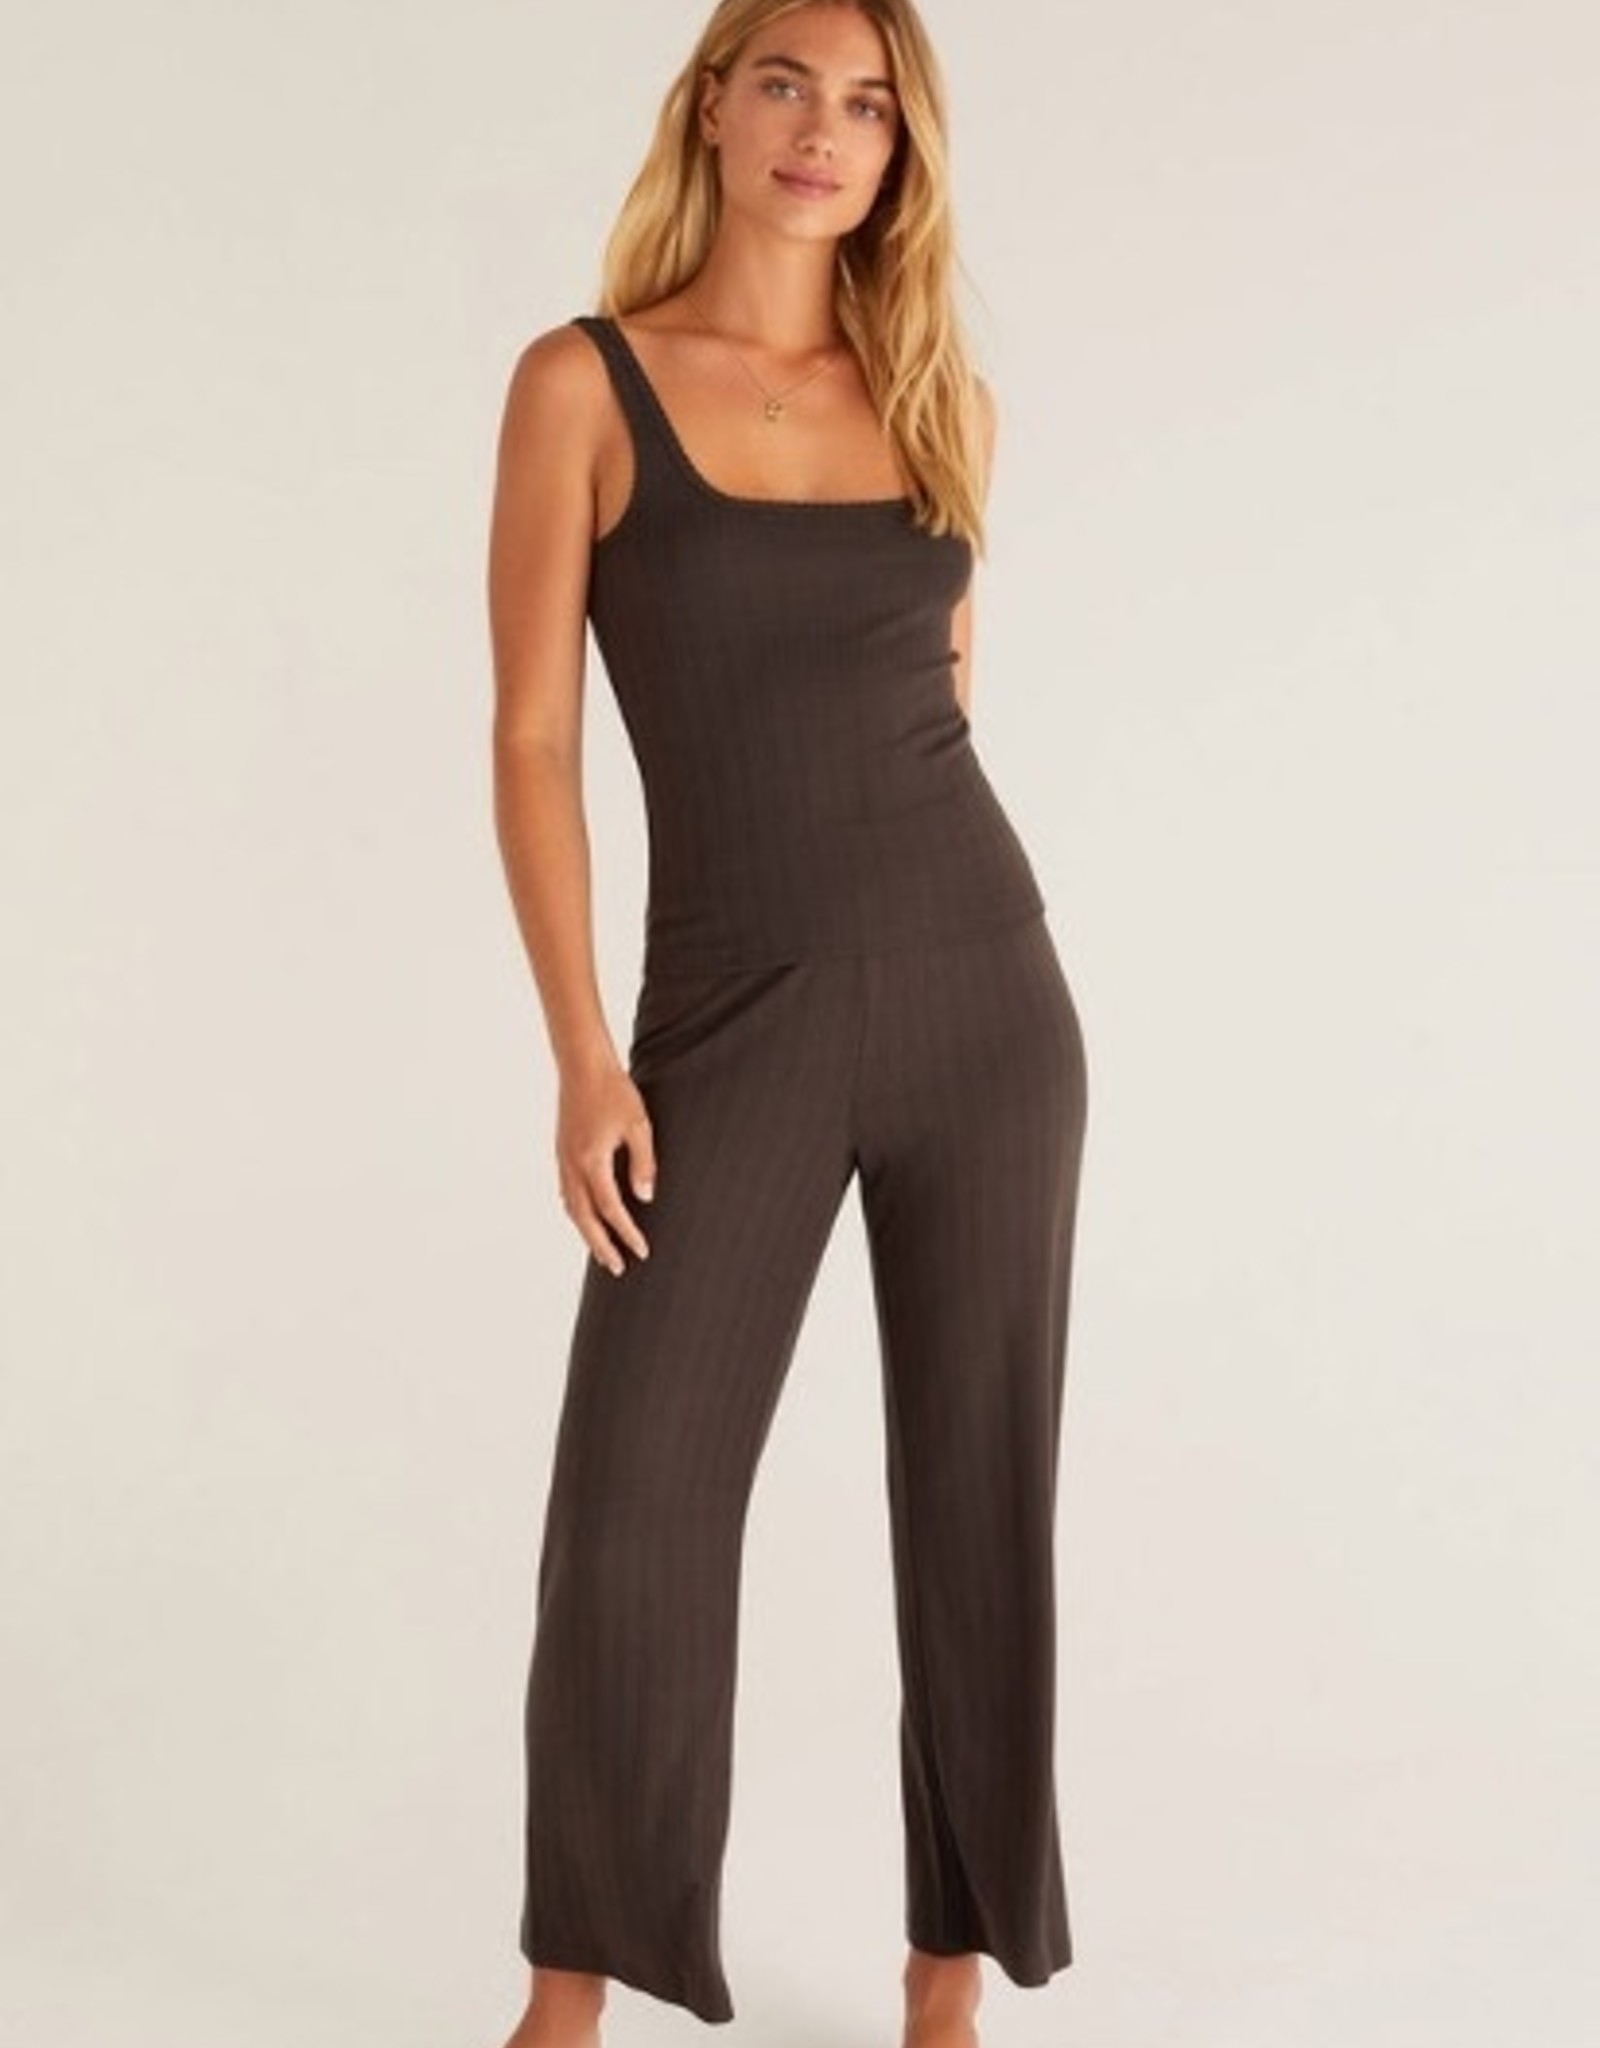 Z Supply Homebound Pointelle Pant